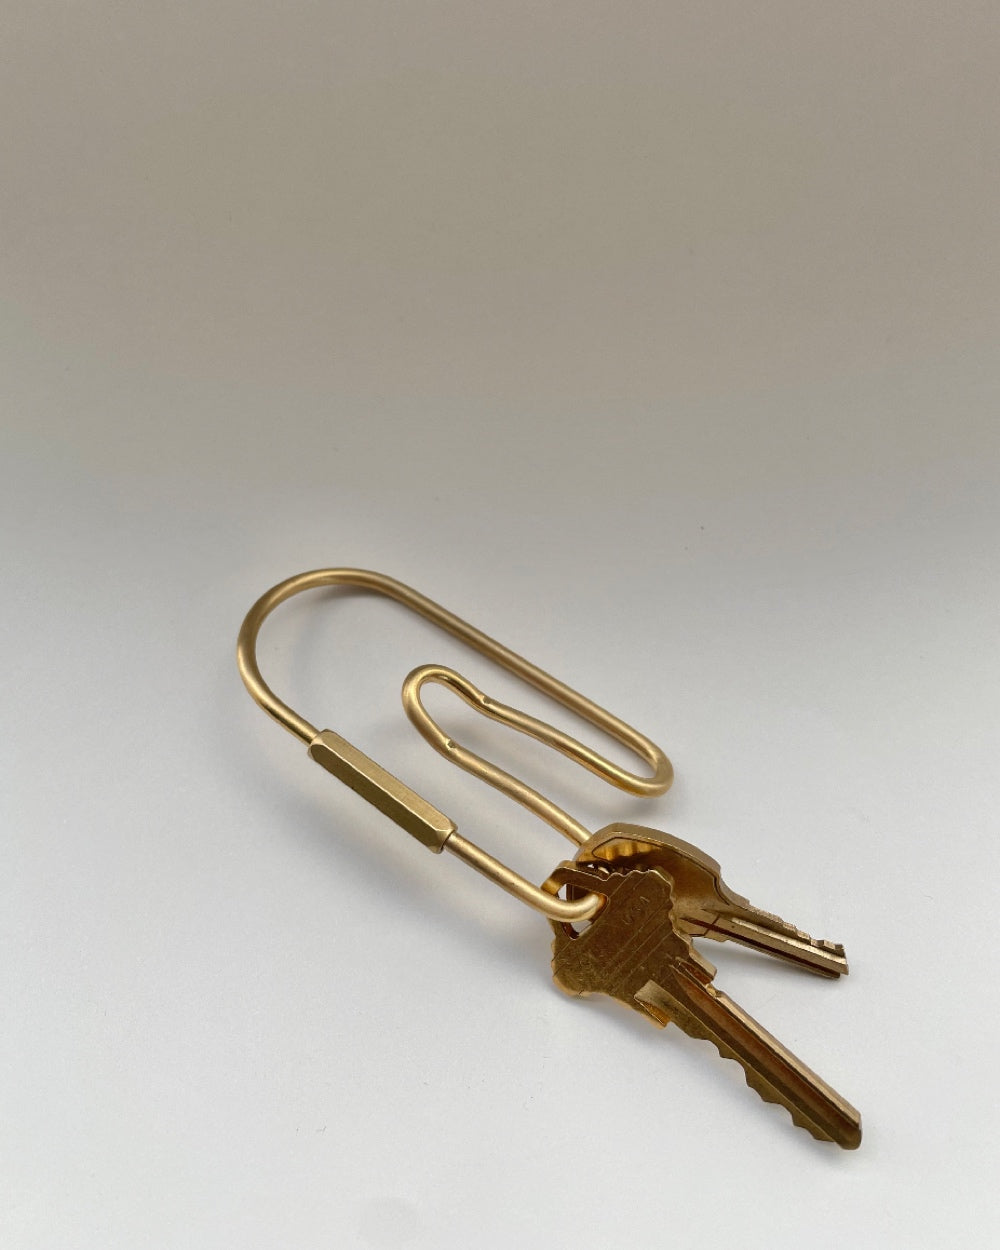 Belt Loop Key Chain in Brass with two keys against a neutral background